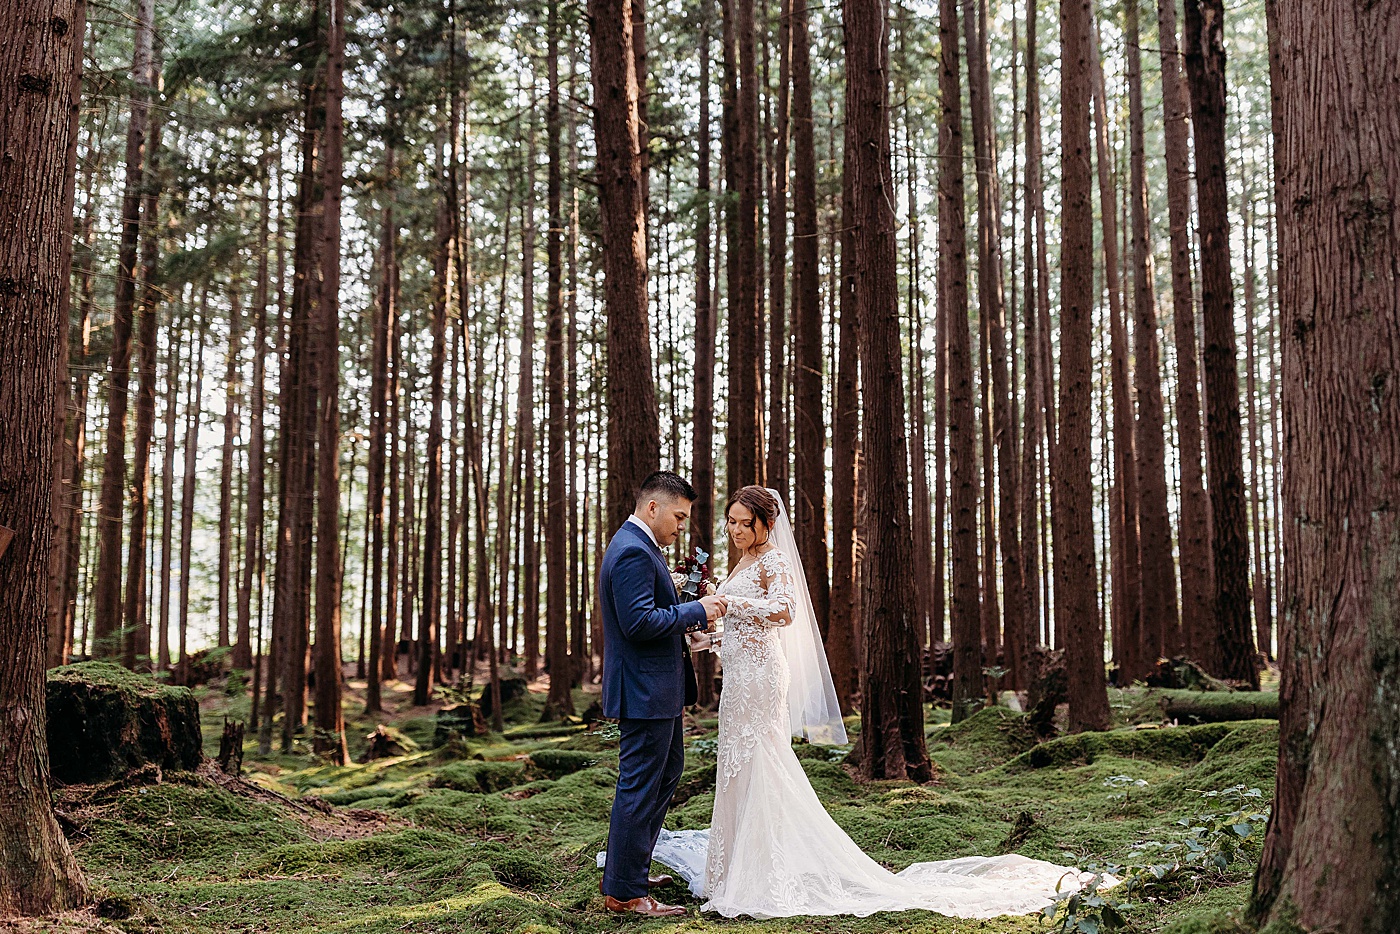 Bride and groom portraits at Emerald Forest Treehouse | Photo by Megan Montalvo Photography